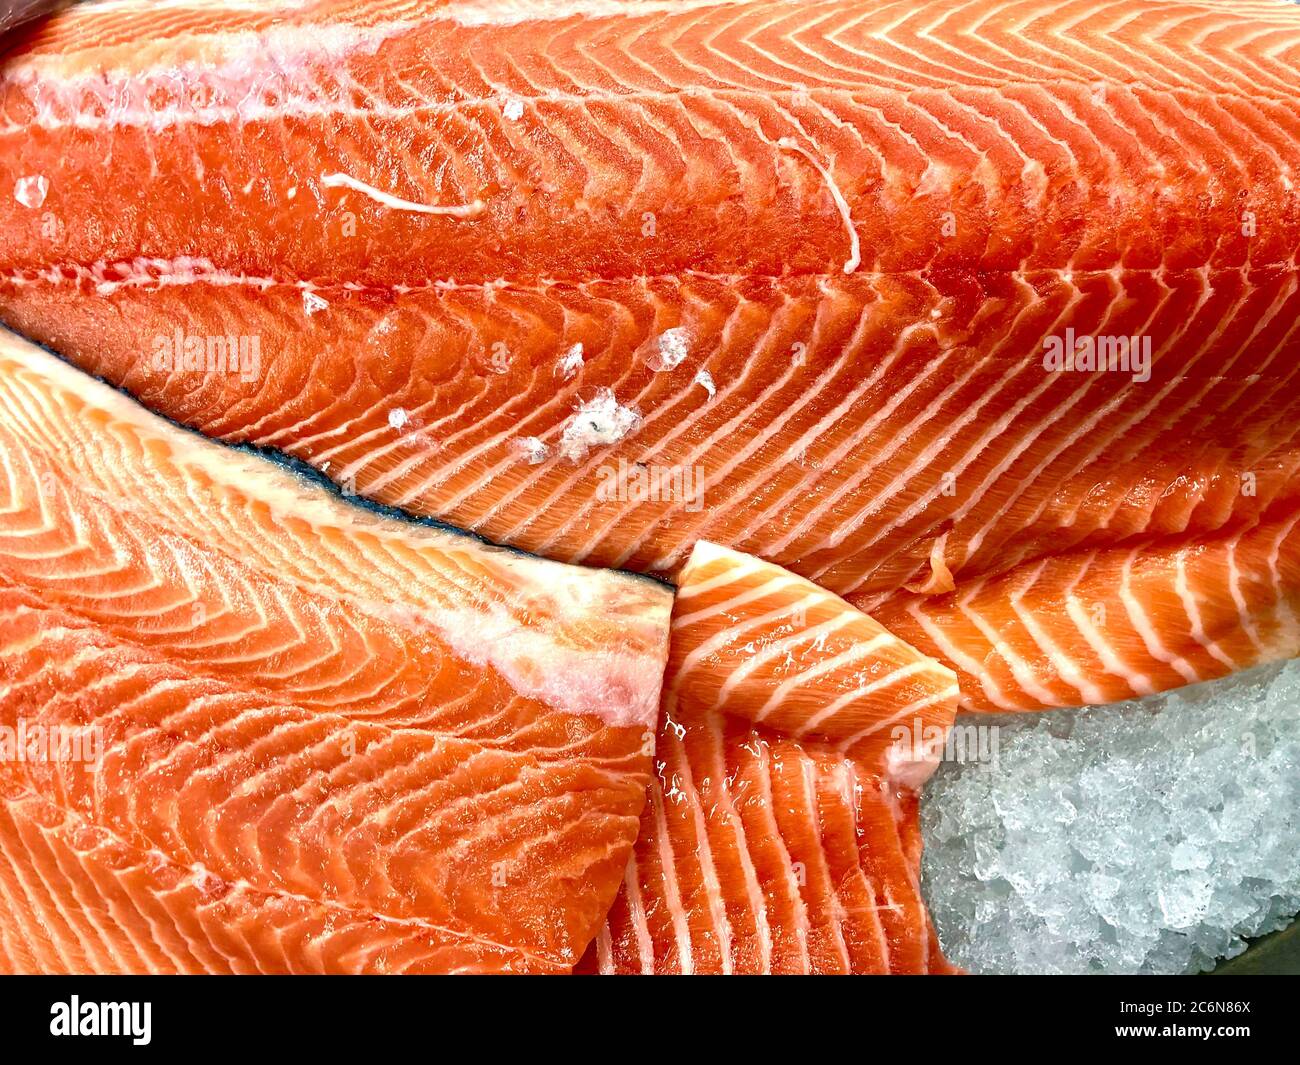 Freshly cut filets of delicious salmon on ice at a fish market Stock Photo